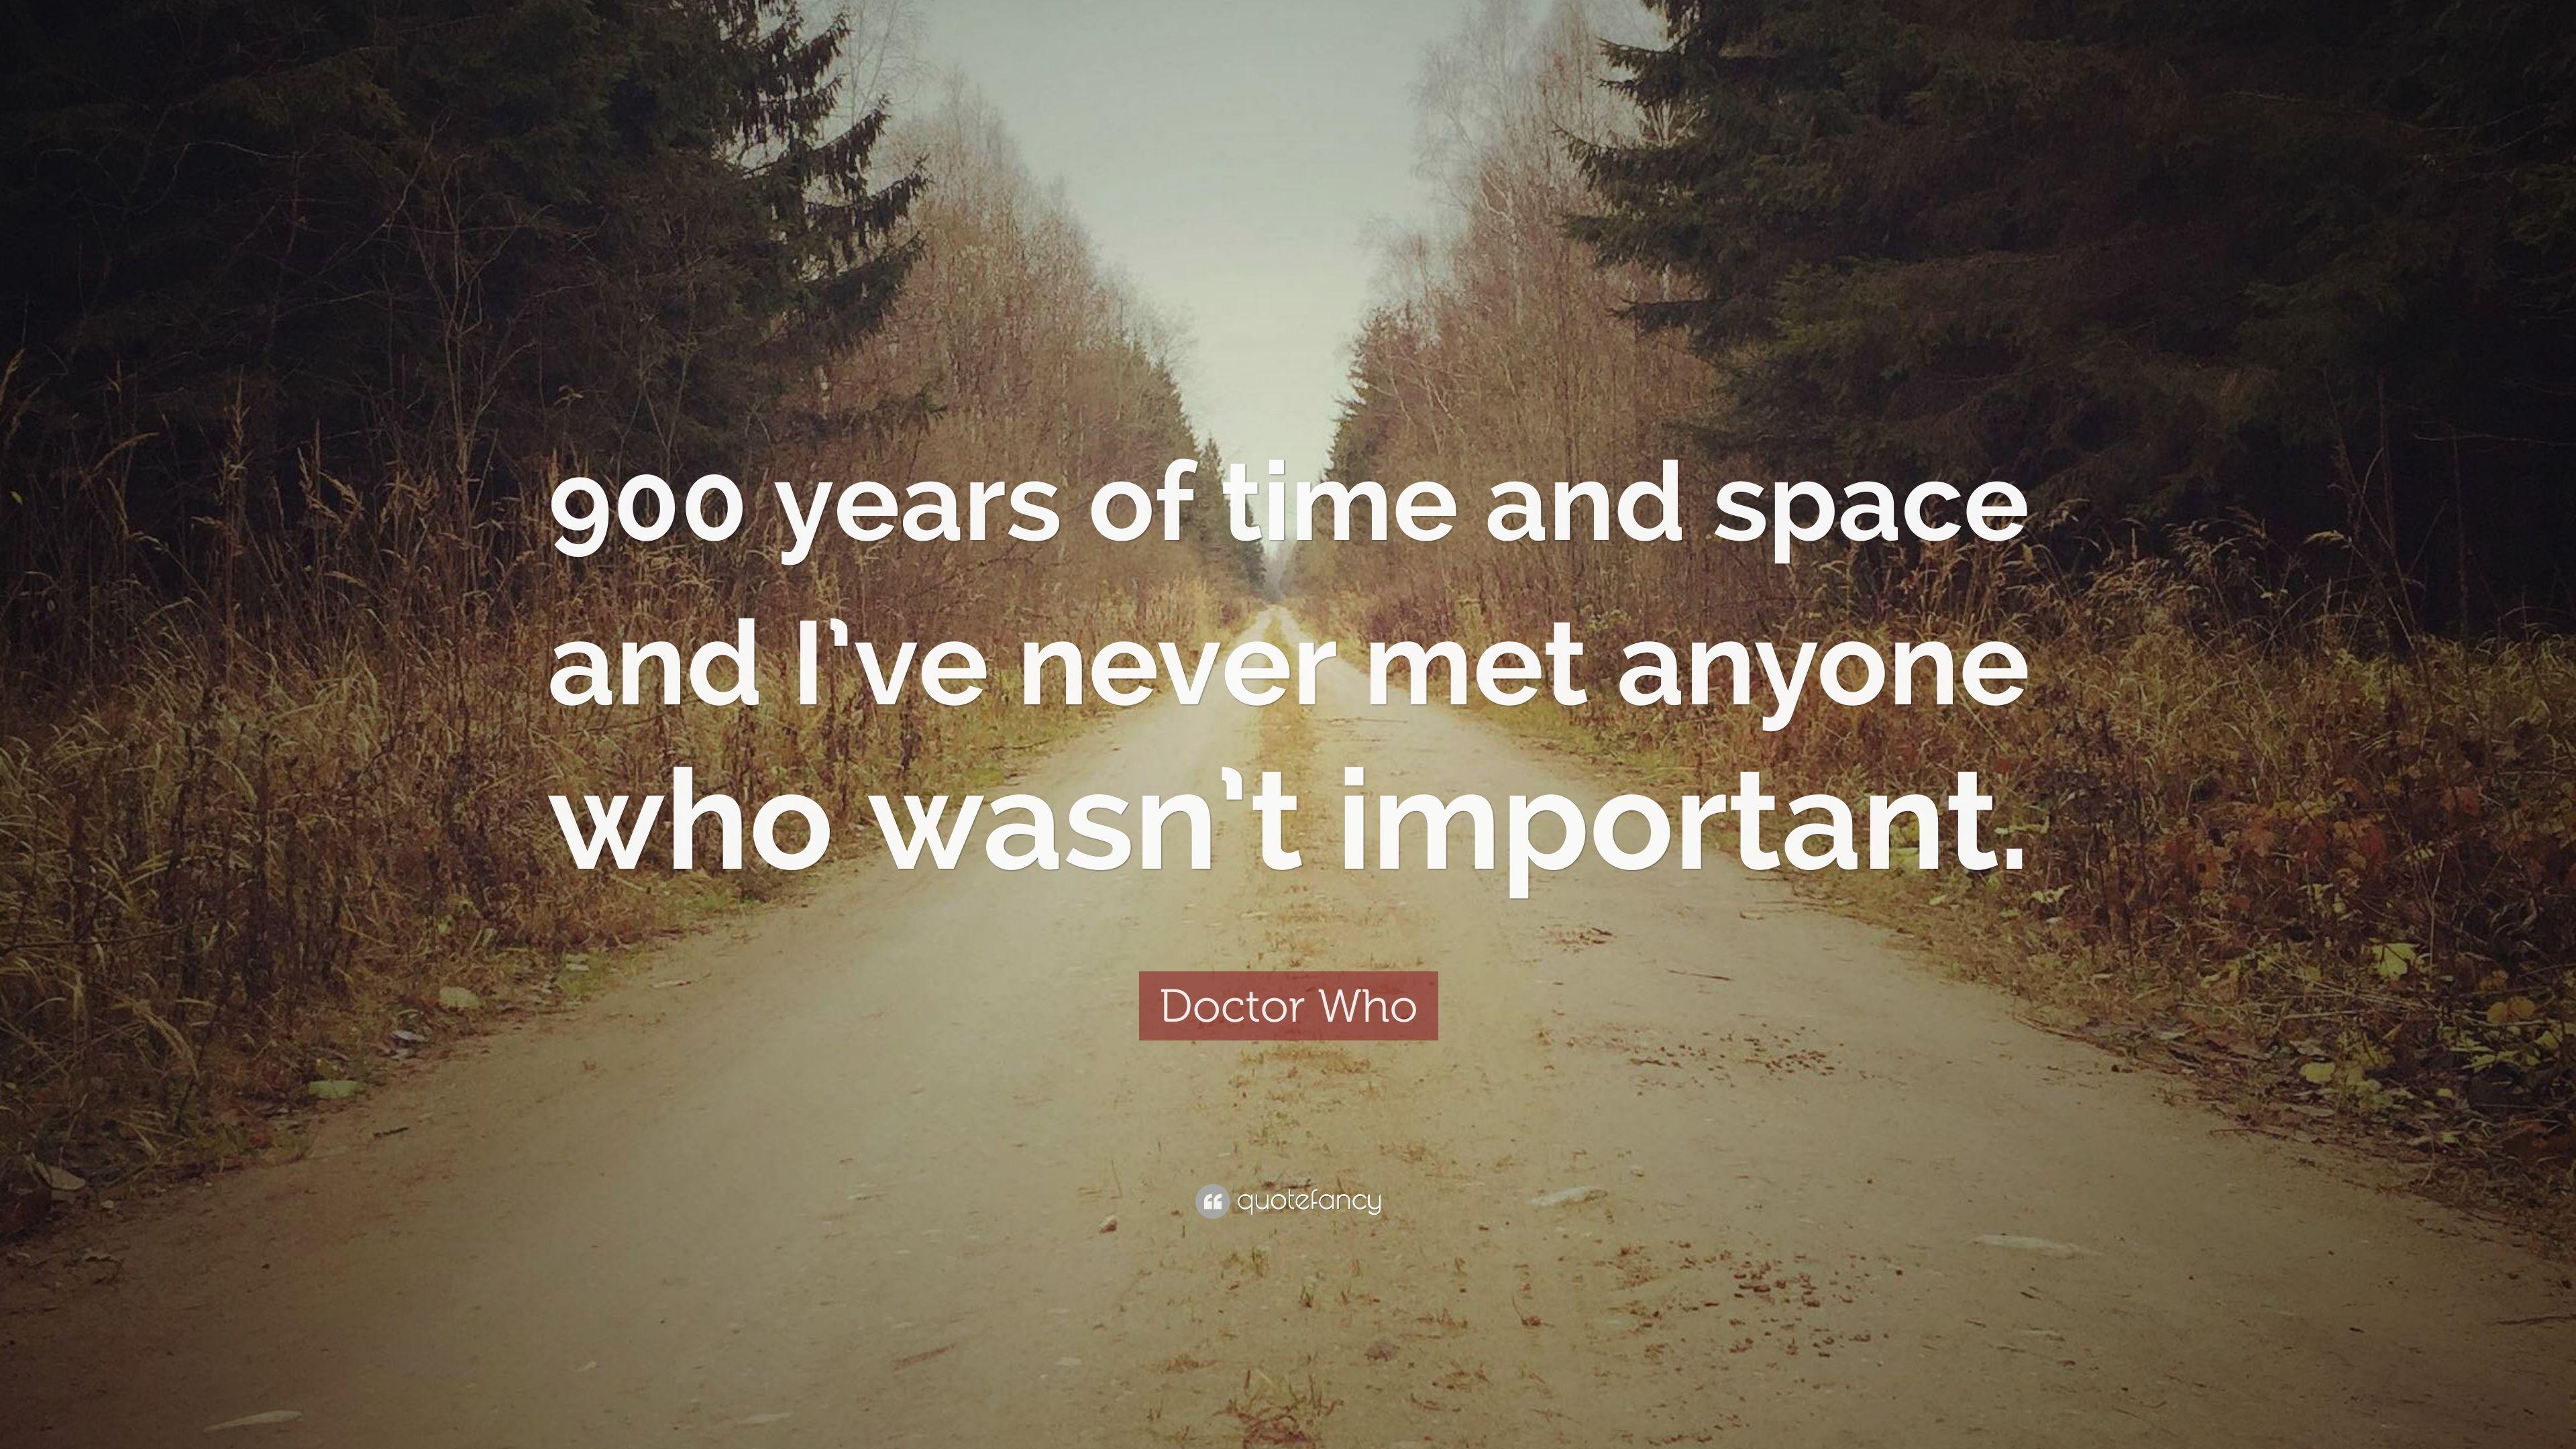 Doctor Who Quote: “900 years of time and space and I've never met